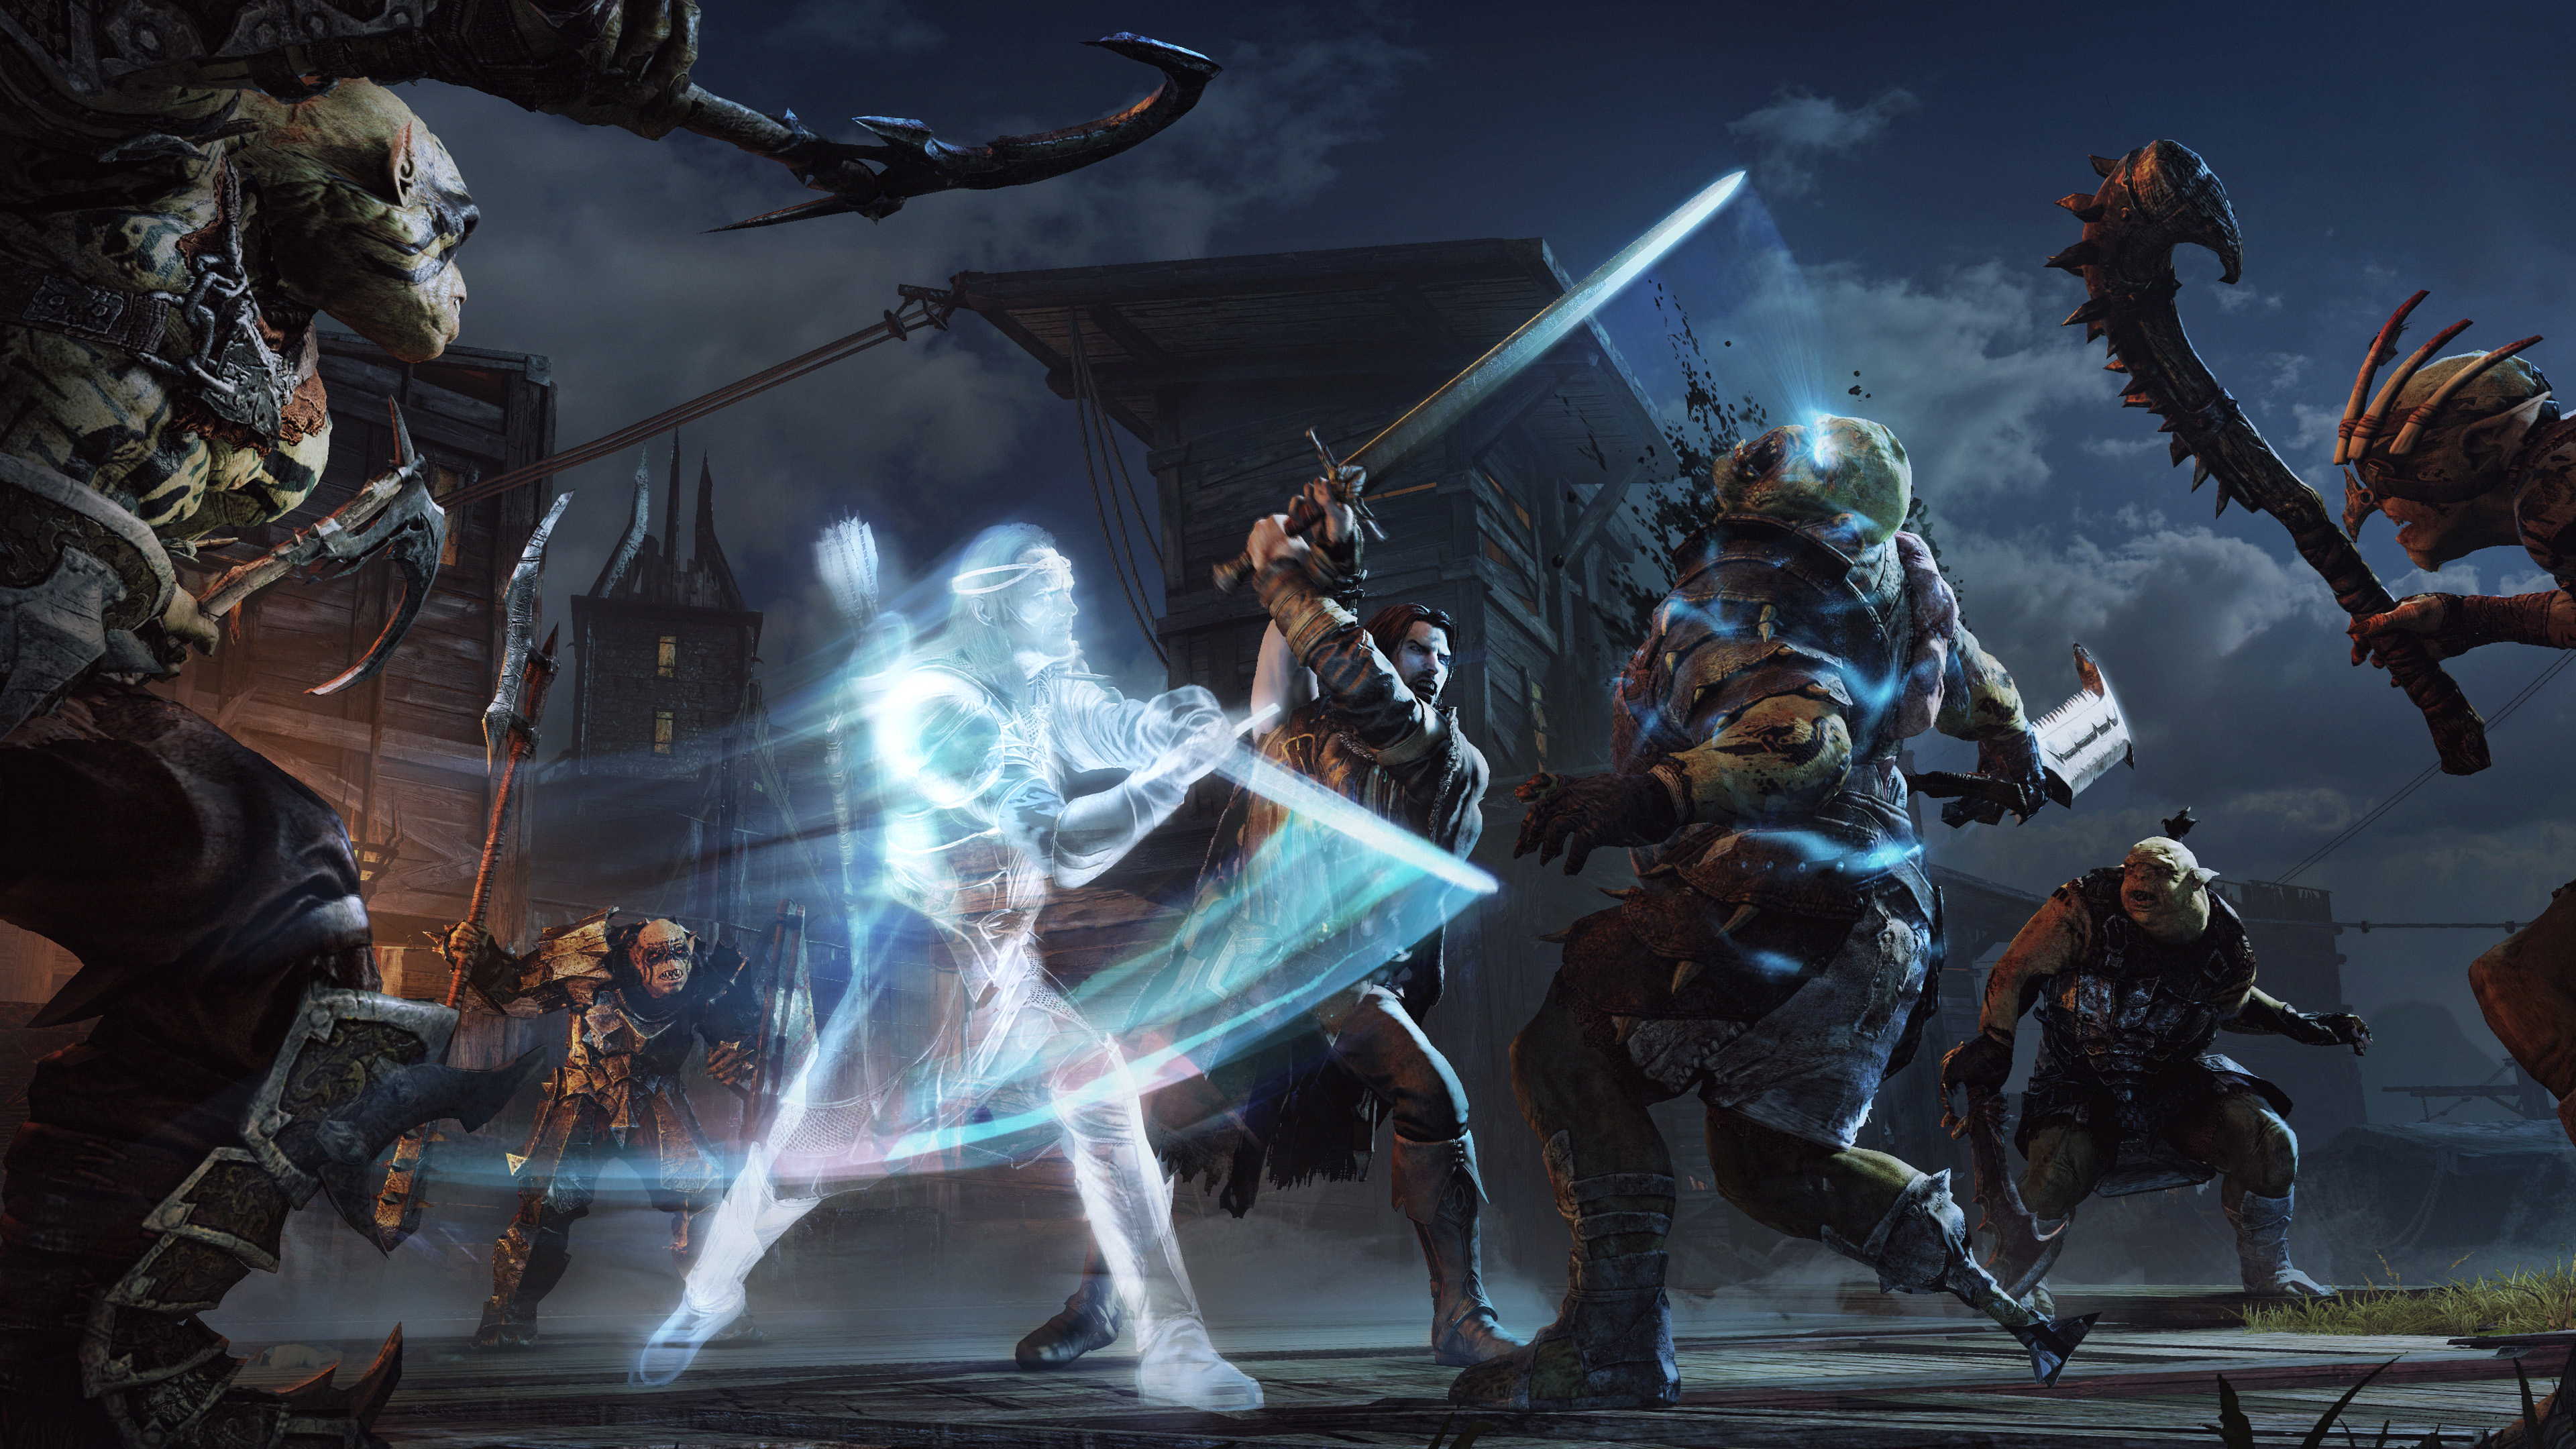 The White Rider achievement in Middle-earth: Shadow of Mordor